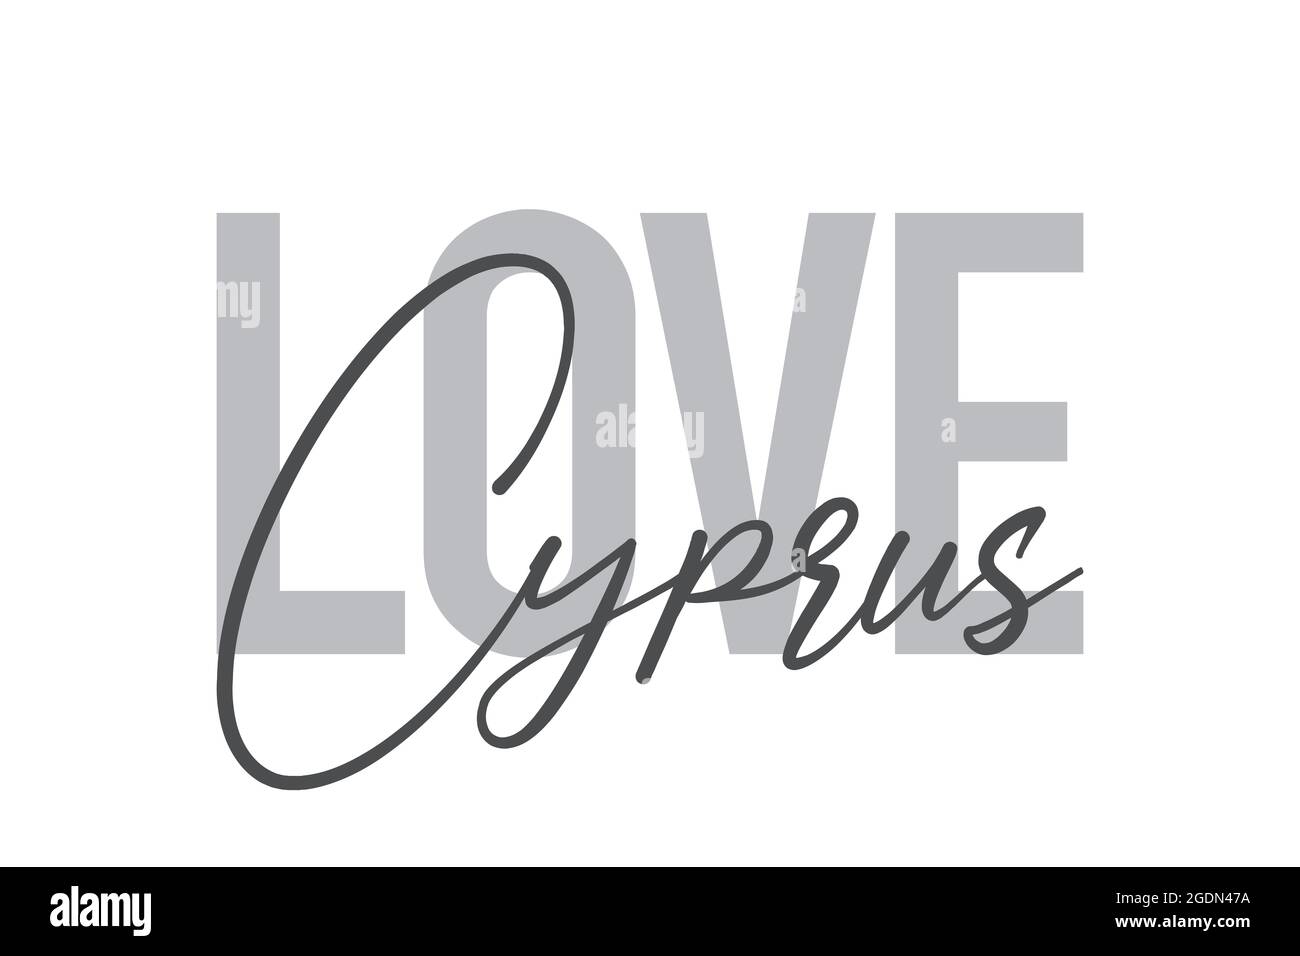 Modern, simple, minimal typographic design of a saying 'Love Cyprus' in tones of grey color. Cool, urban, trendy and playful graphic vector art with h Stock Photo